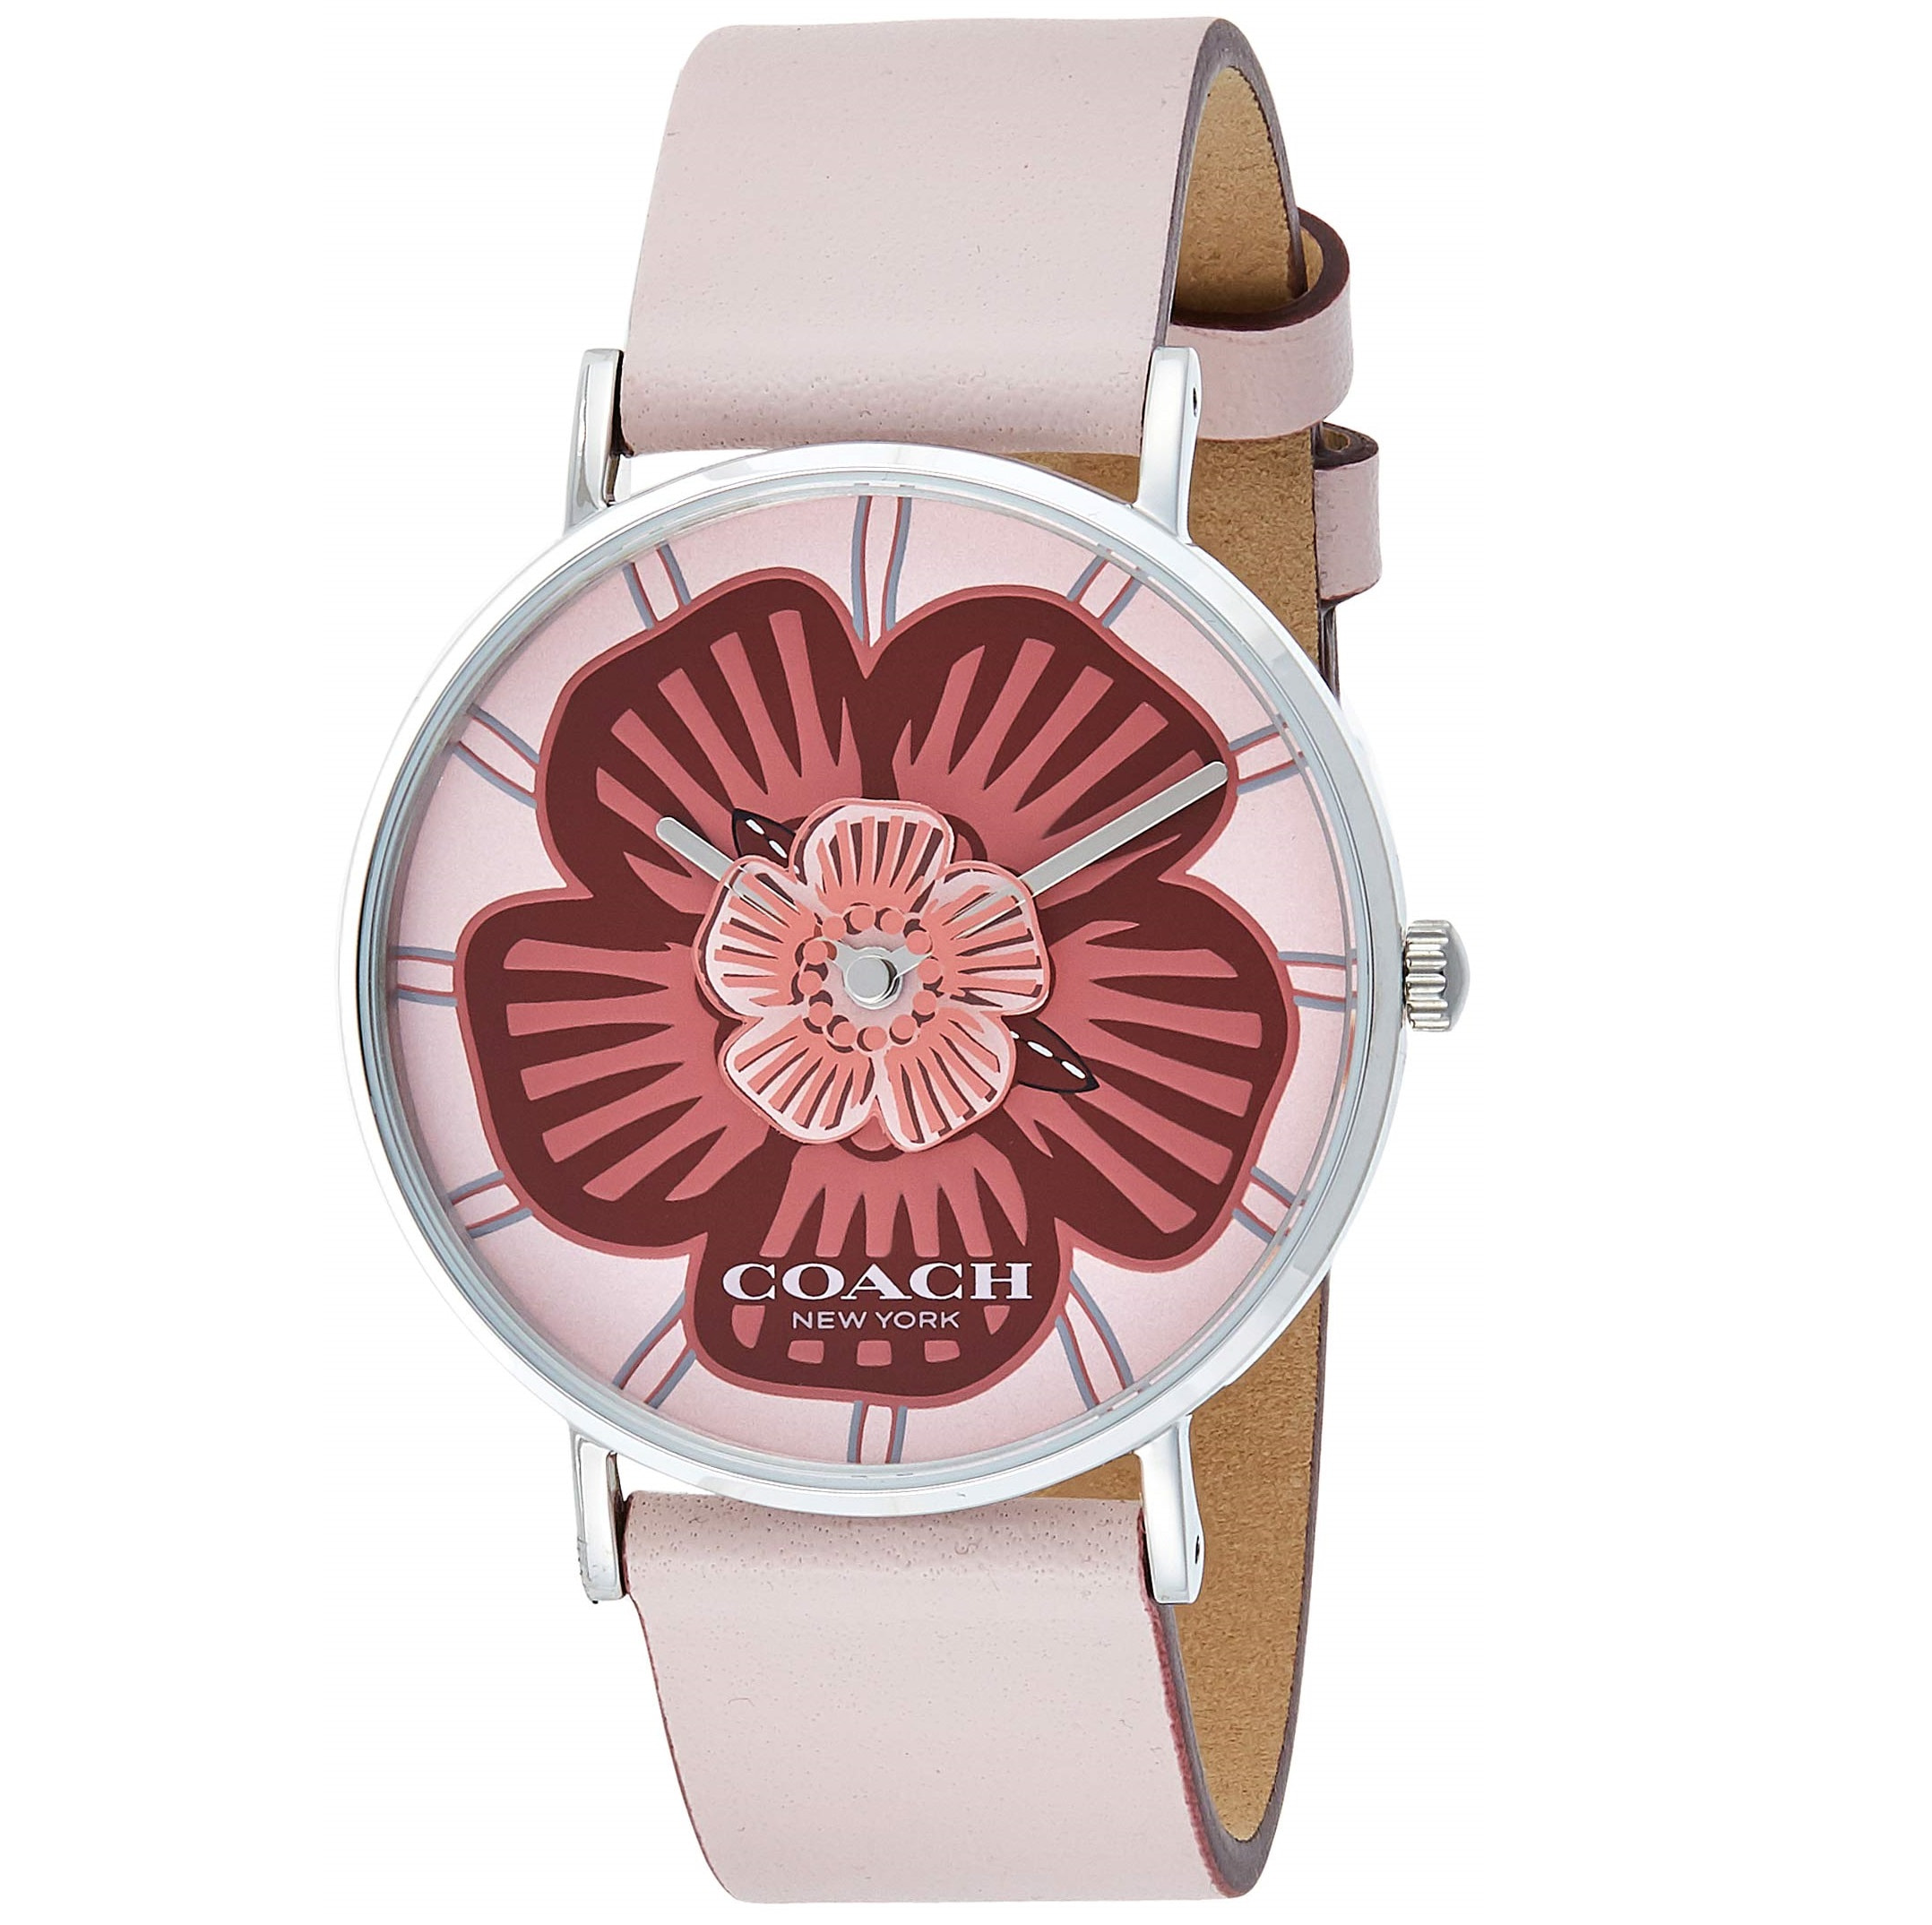 ĐỒNG HỒ ĐEO TAY COACH PERRY QUARTZ PINK FLORAL DIAL LADIES WATCH 14503231 2